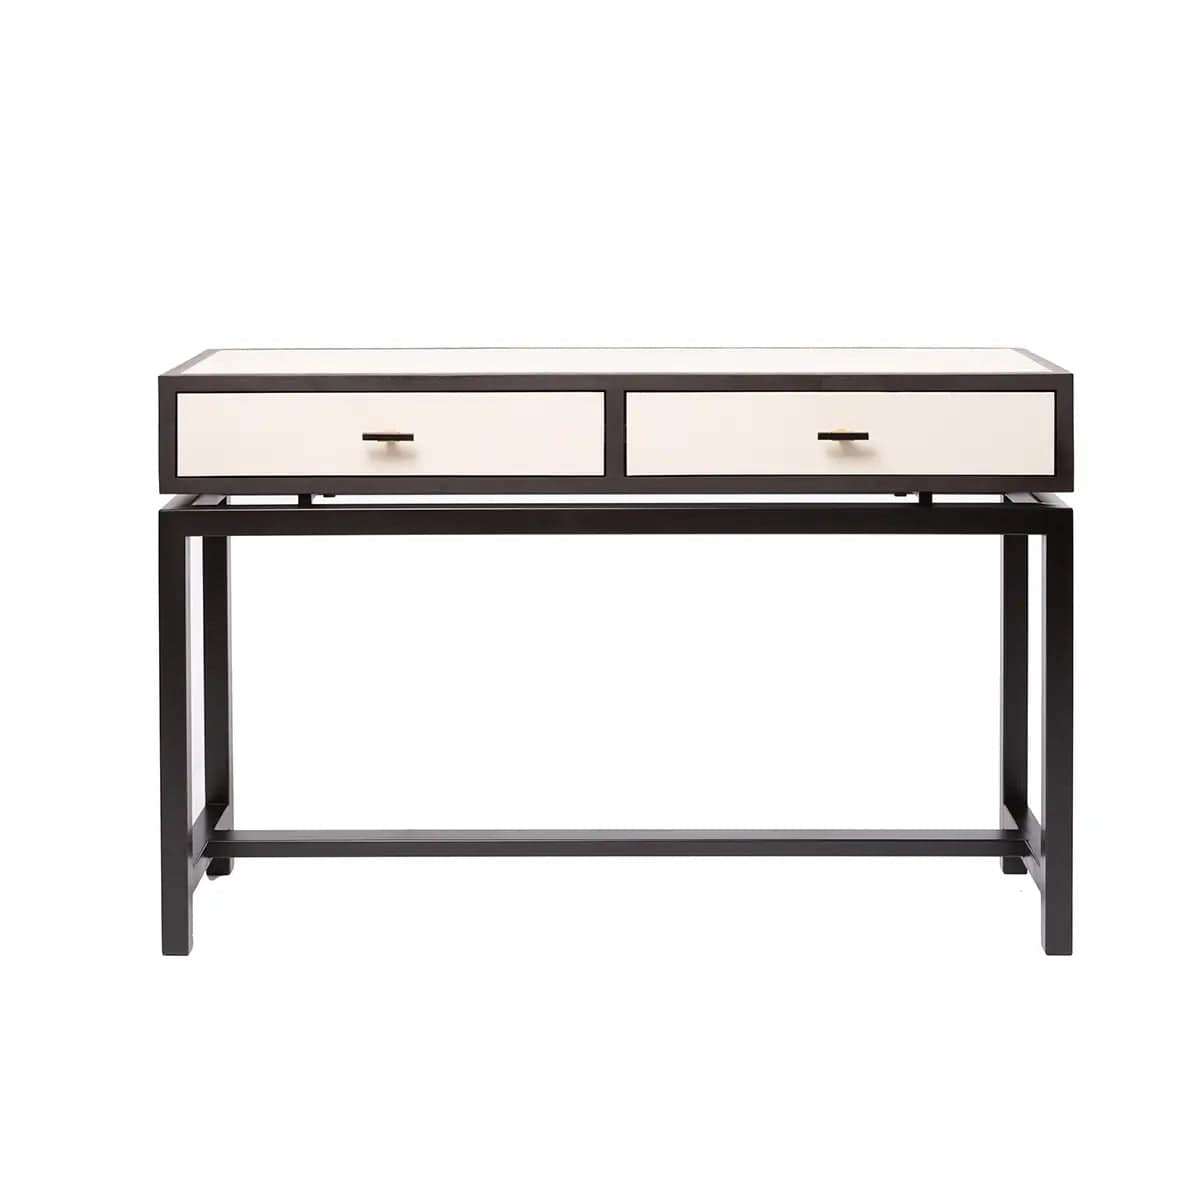 Eccotrading Design London Living Bertie Console 2 Drawer Pumice Leather House of Isabella UK